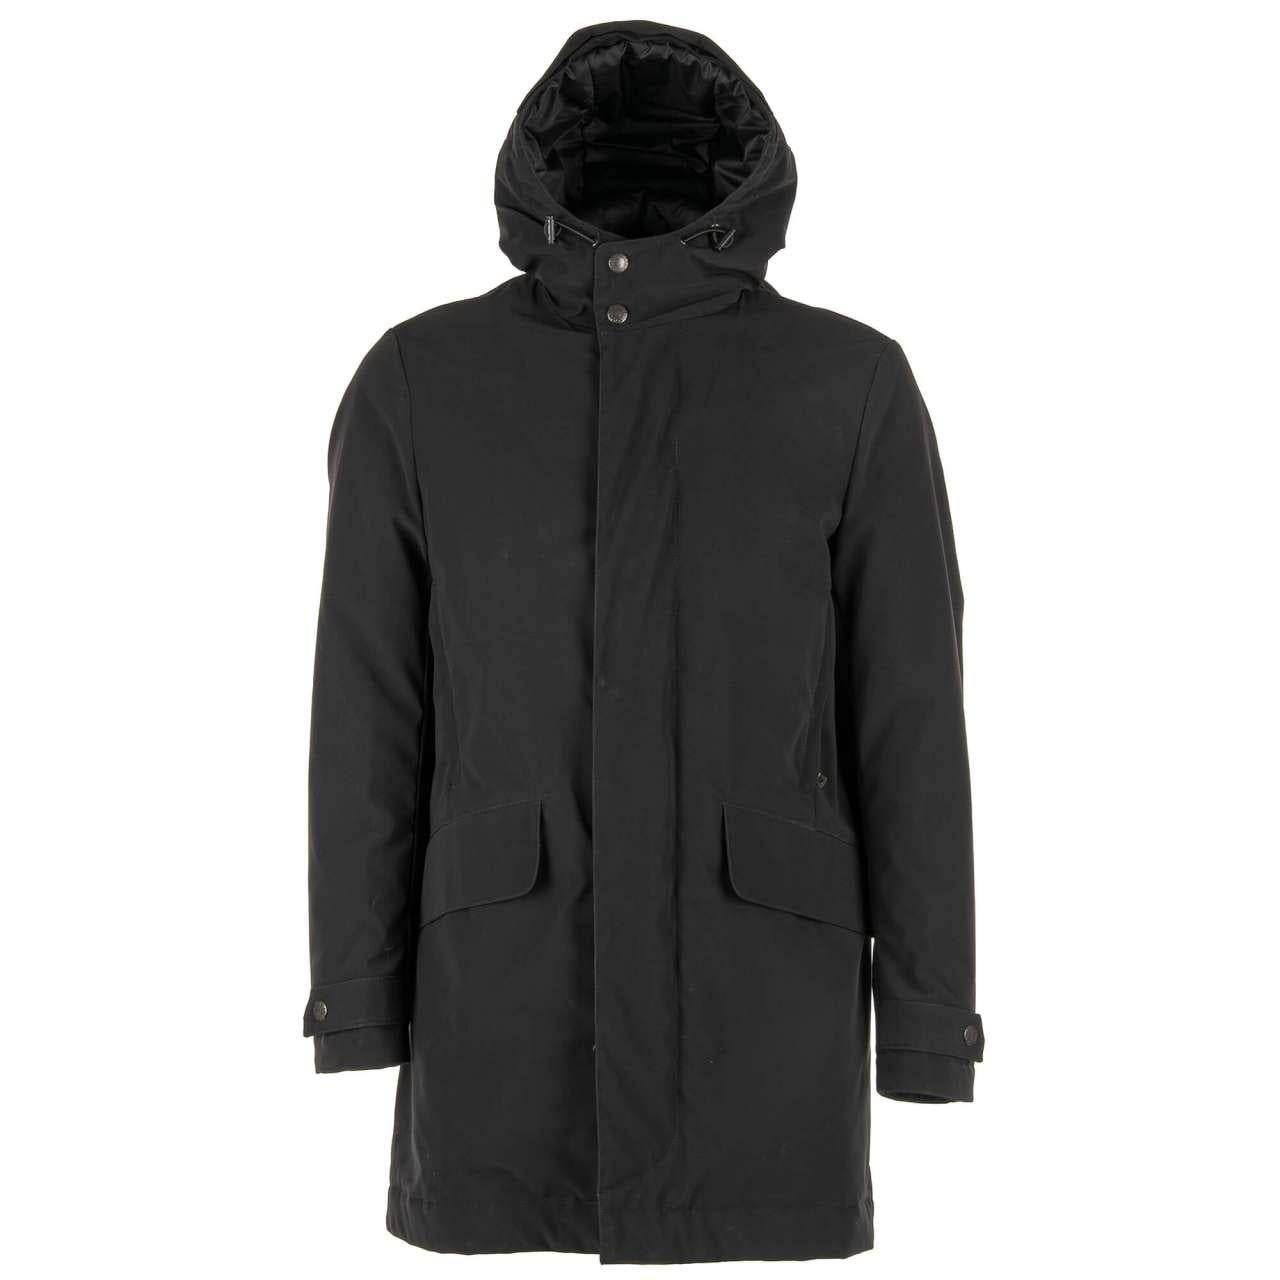 Men's Dolce & Gabbana Classic Hooded Parka Jacket with Pockets and Logo Black 46 S For Sale